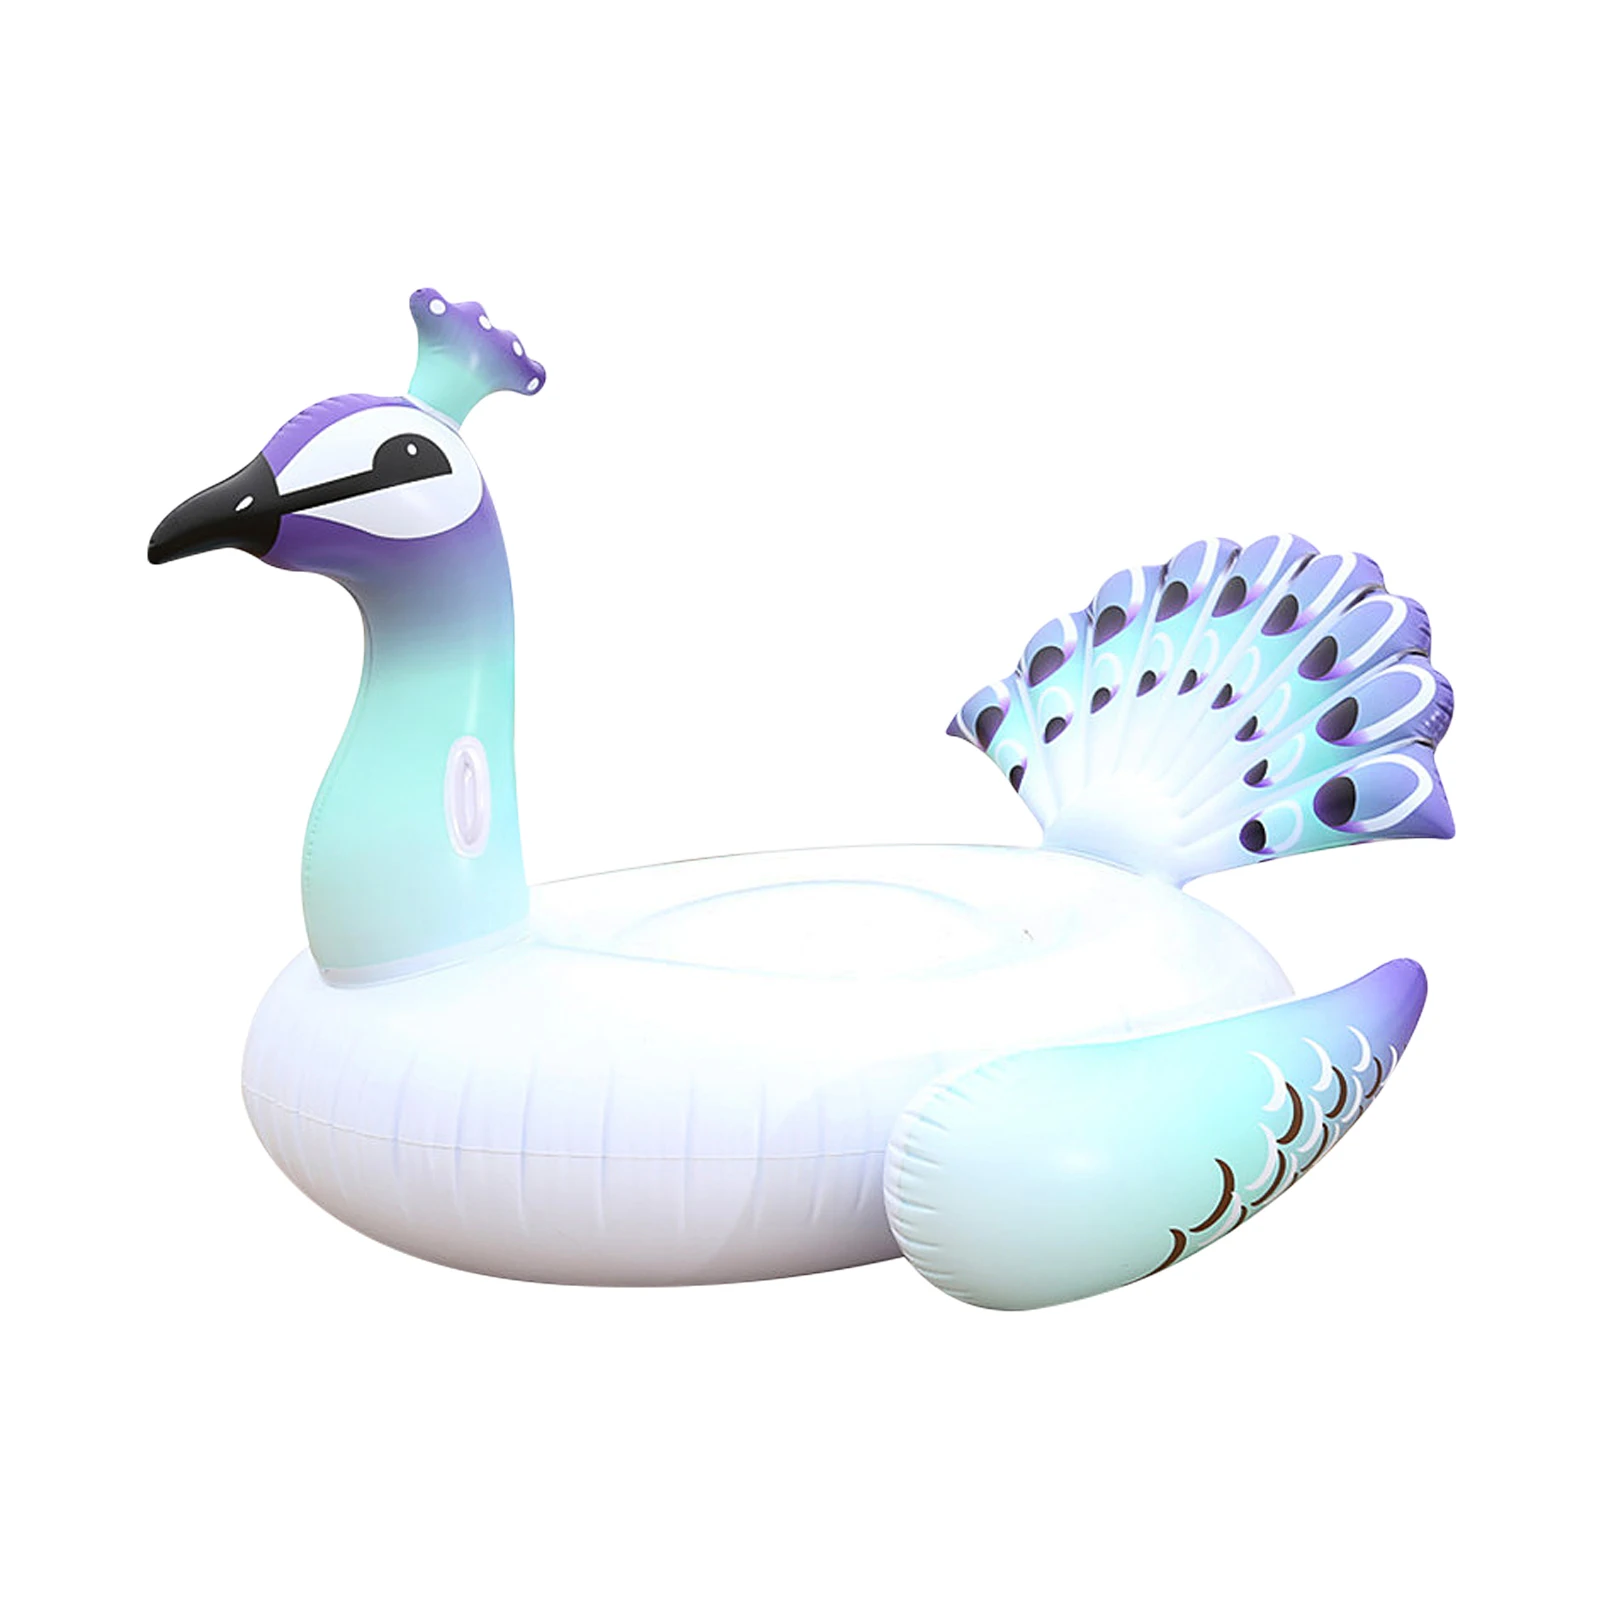 

Giant Peacocks Float Swimming Ring Floating Bed Adult Kids Pool Floats Iatable Mattress Floating Bed Beach Swimming Pool Toys